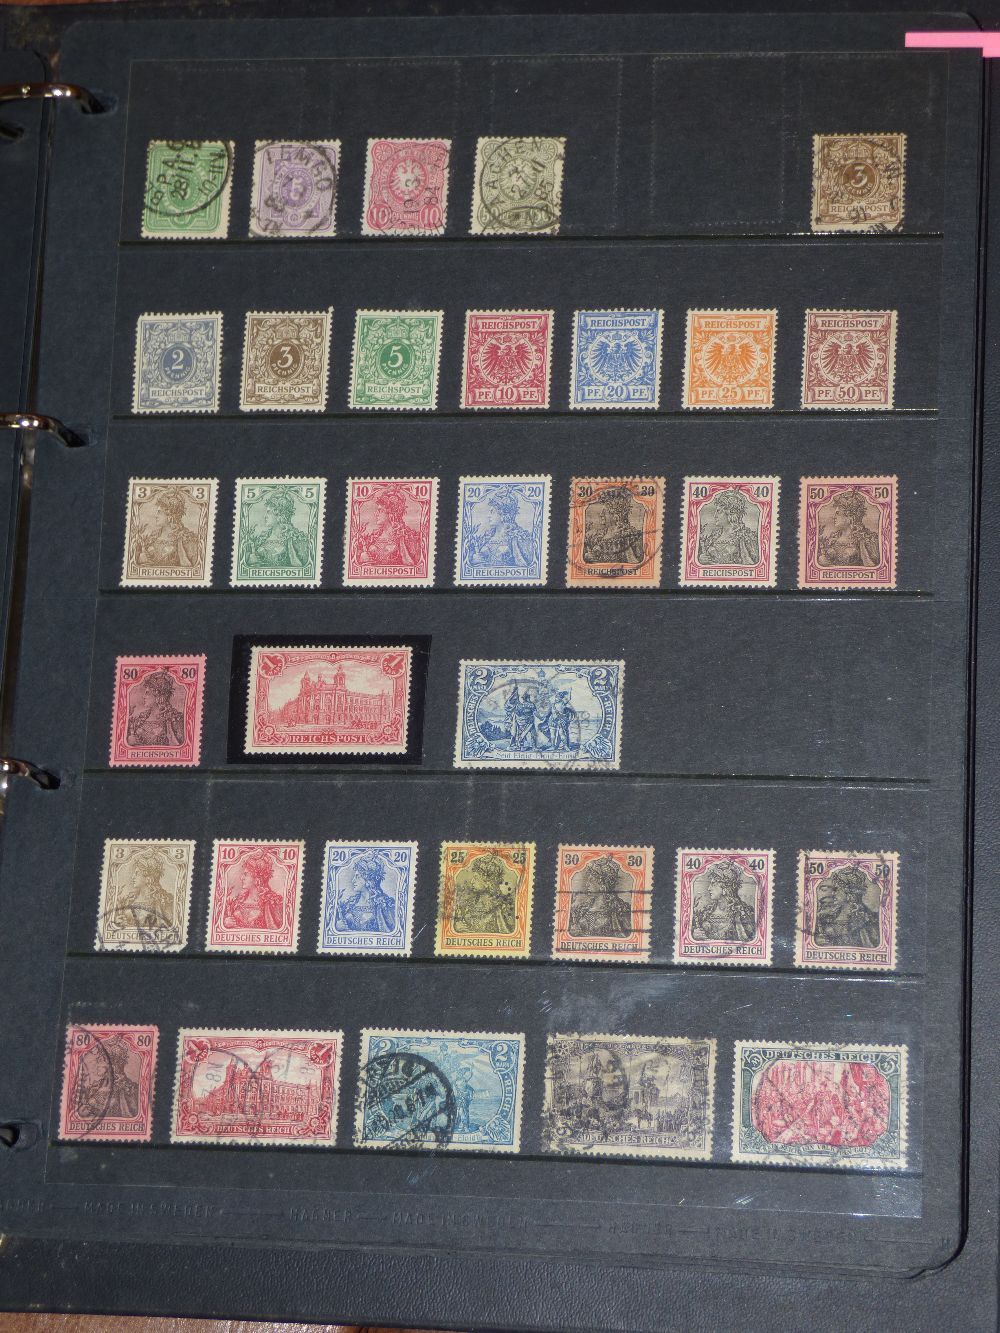 Folder containing a collection of stamps from the German Empire, mint & used from early issues & - Image 4 of 5